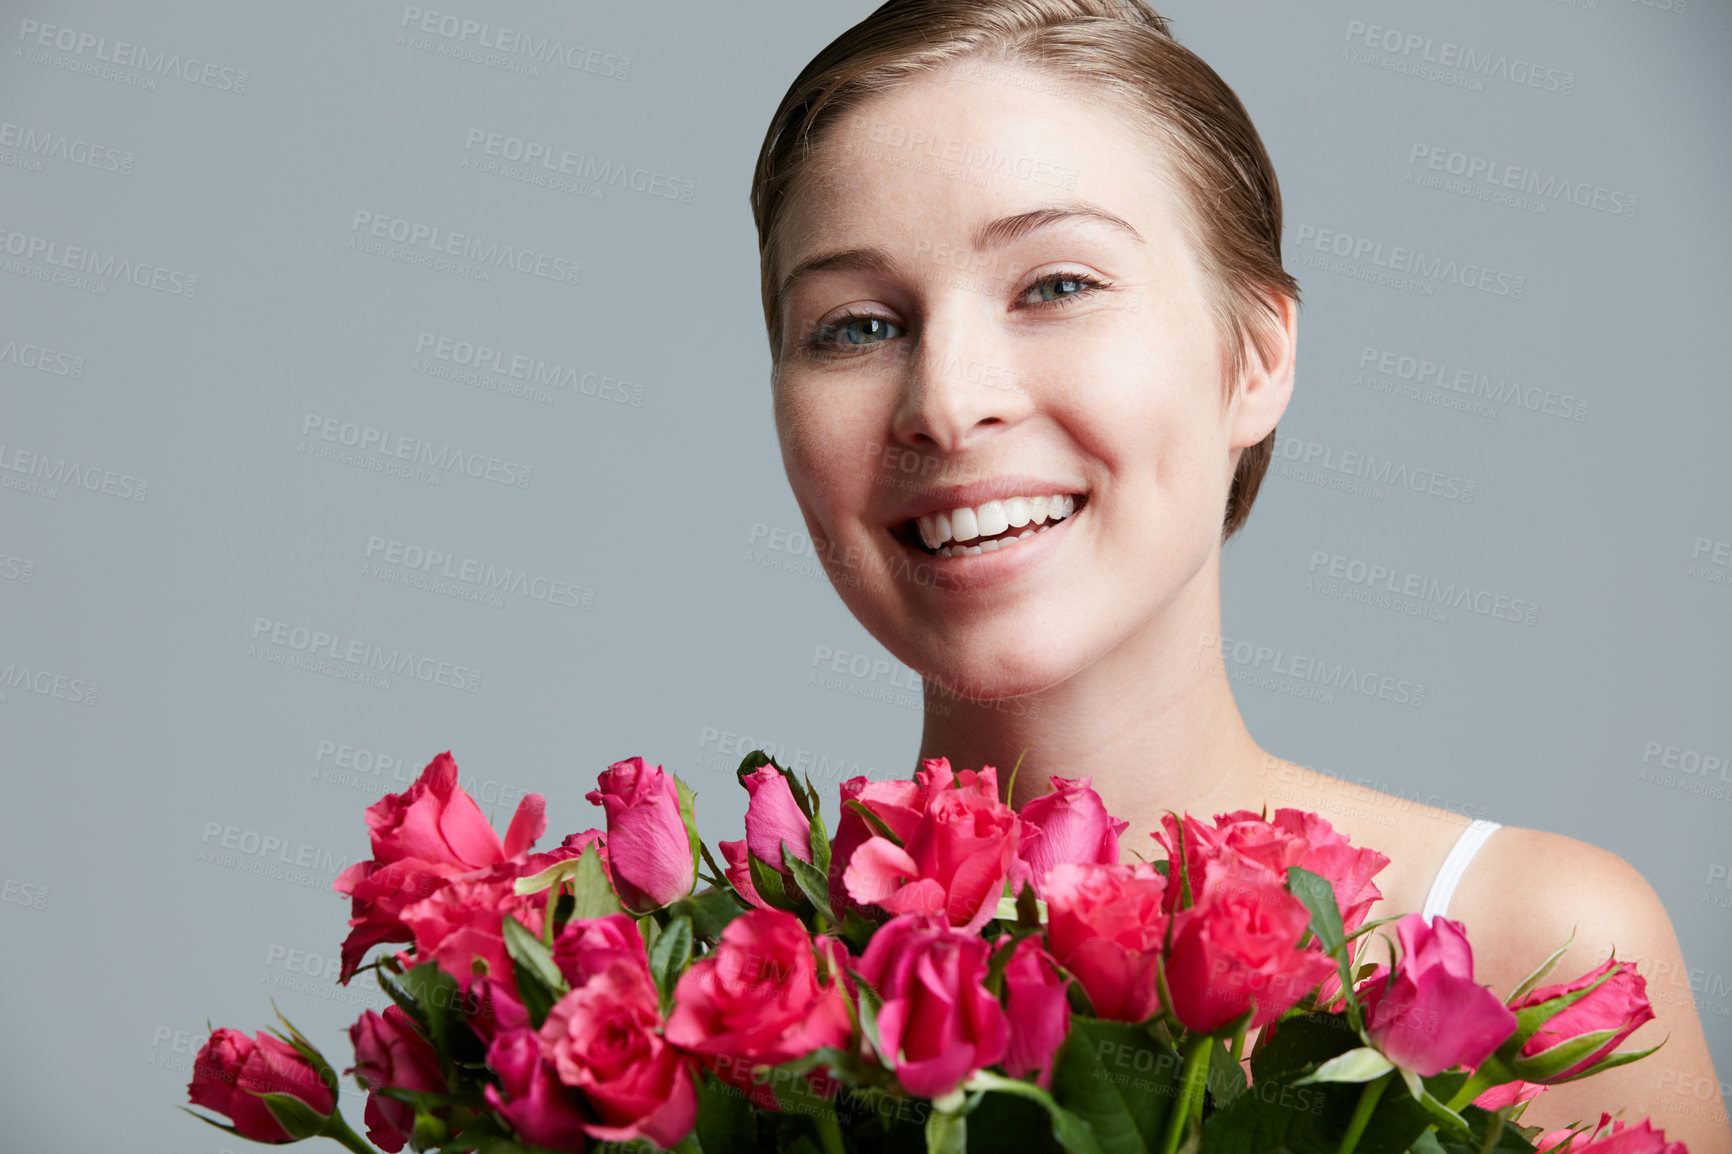 Buy stock photo Studio portrait of an attractive young woman holding a bunch of pink roses against a gray background